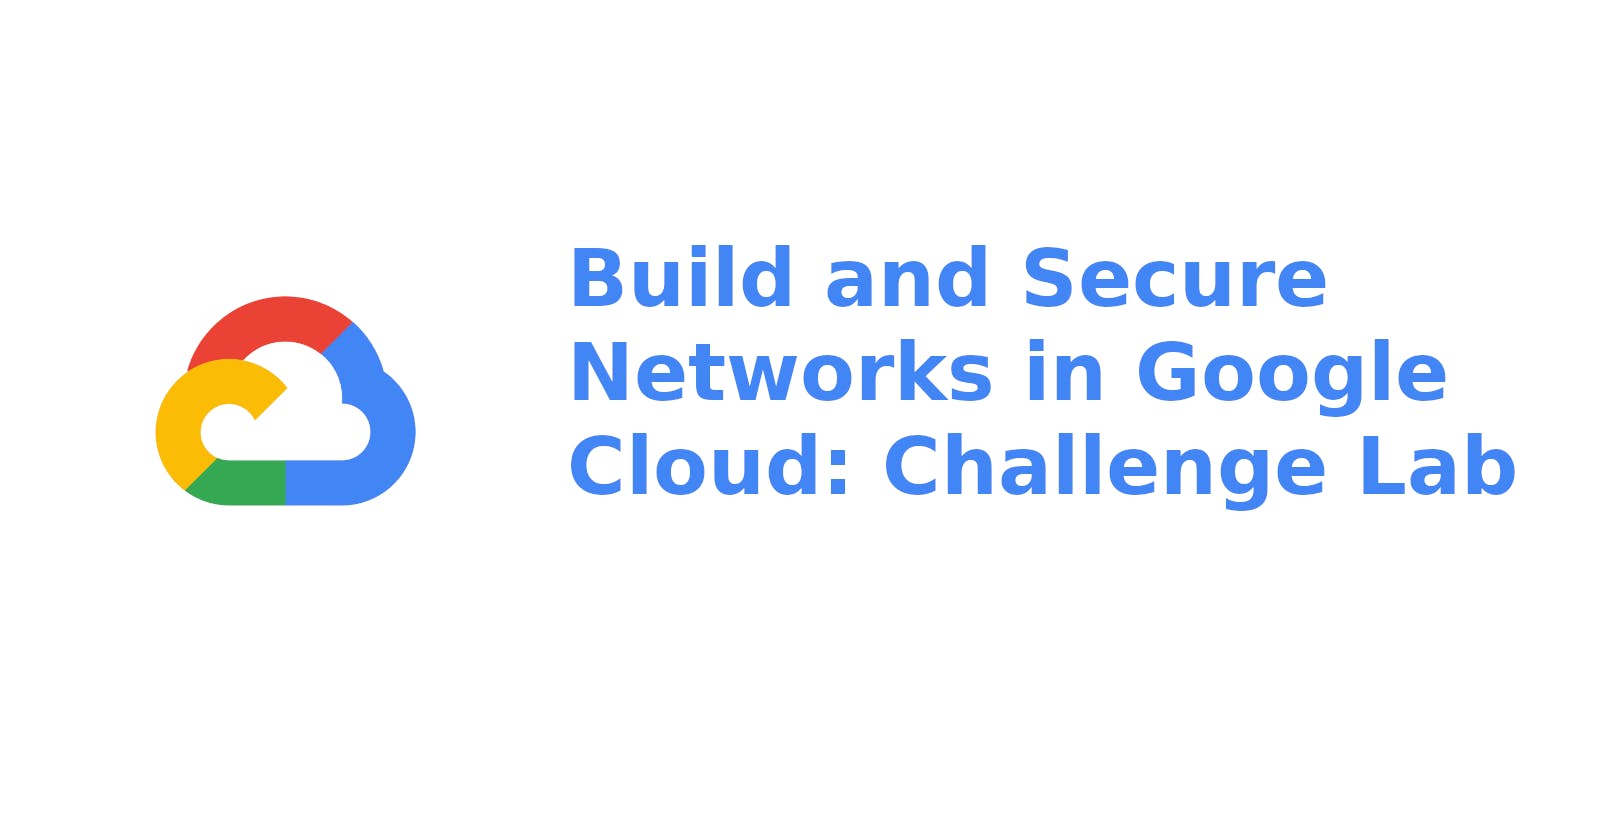 Build and Secure Networks in Google Cloud: Challenge Lab Solved